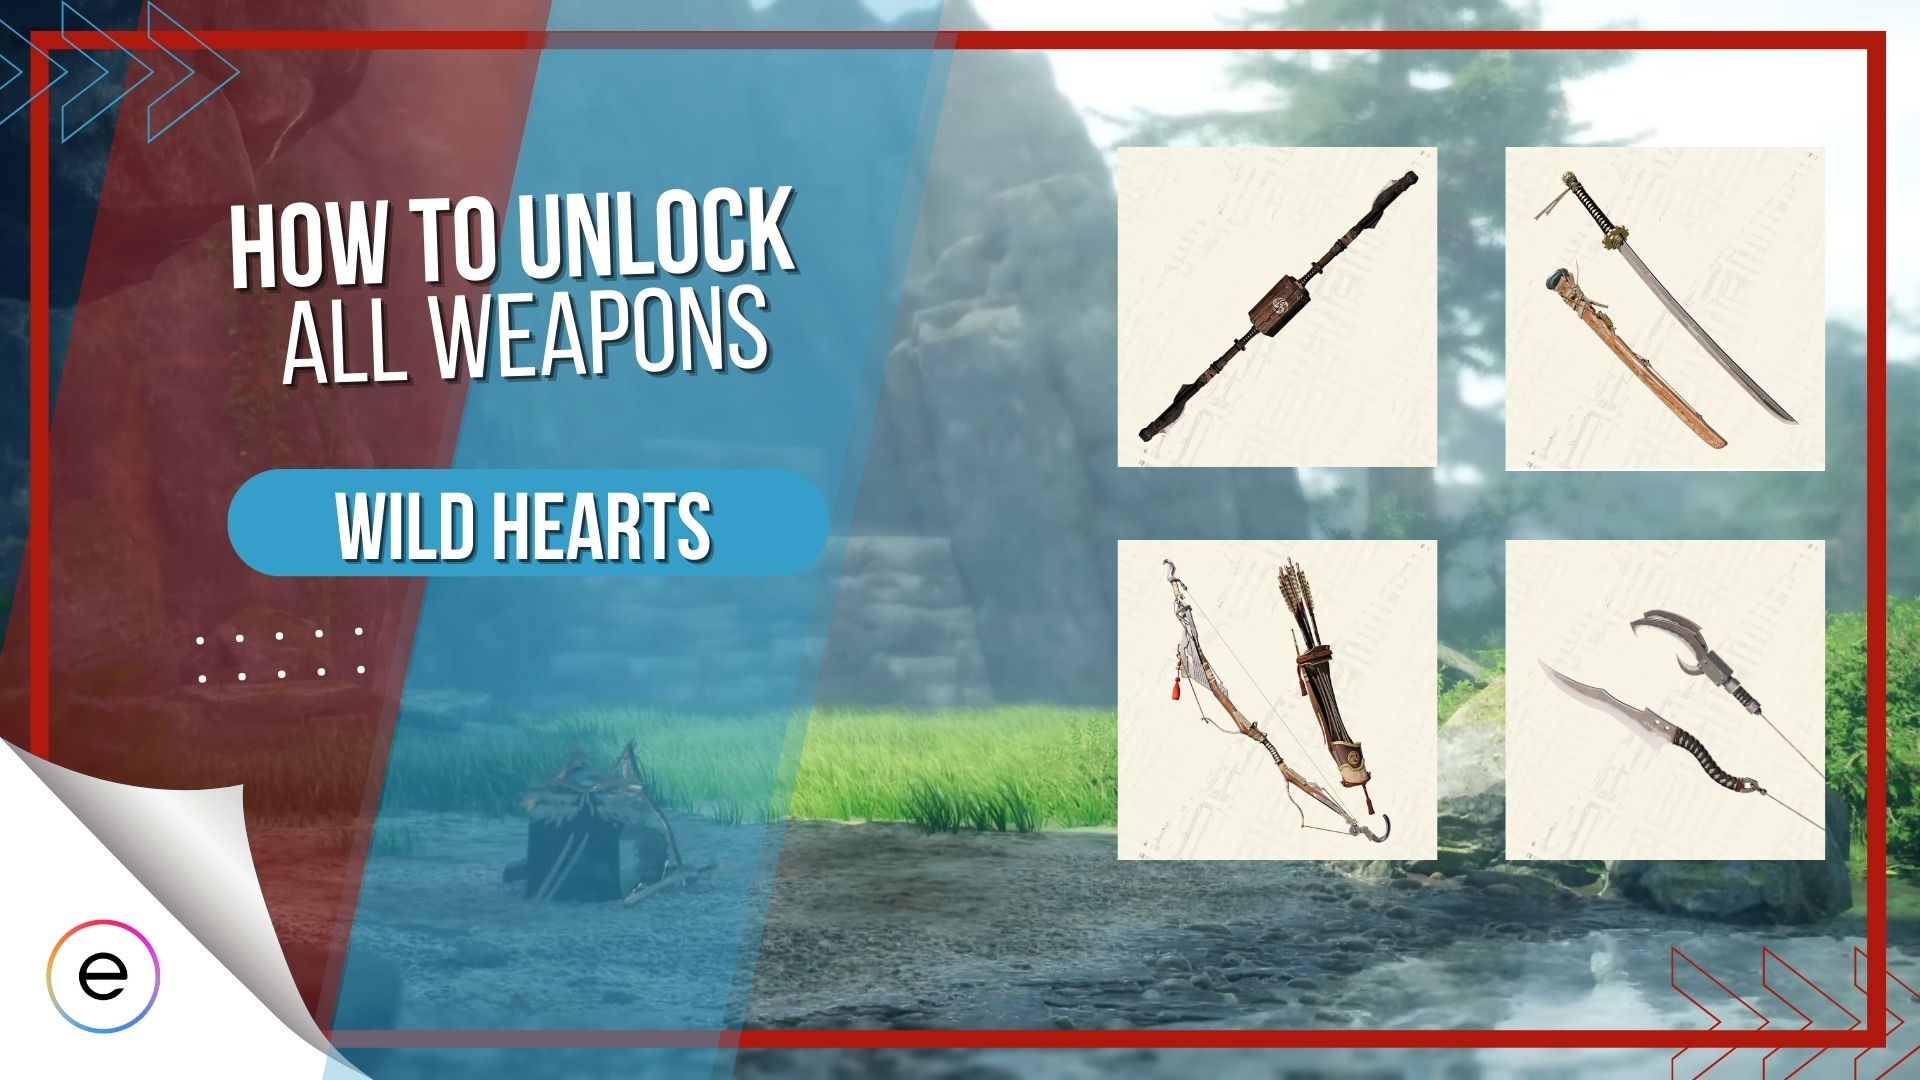 how to unlock all weapons in Wild Hearts.